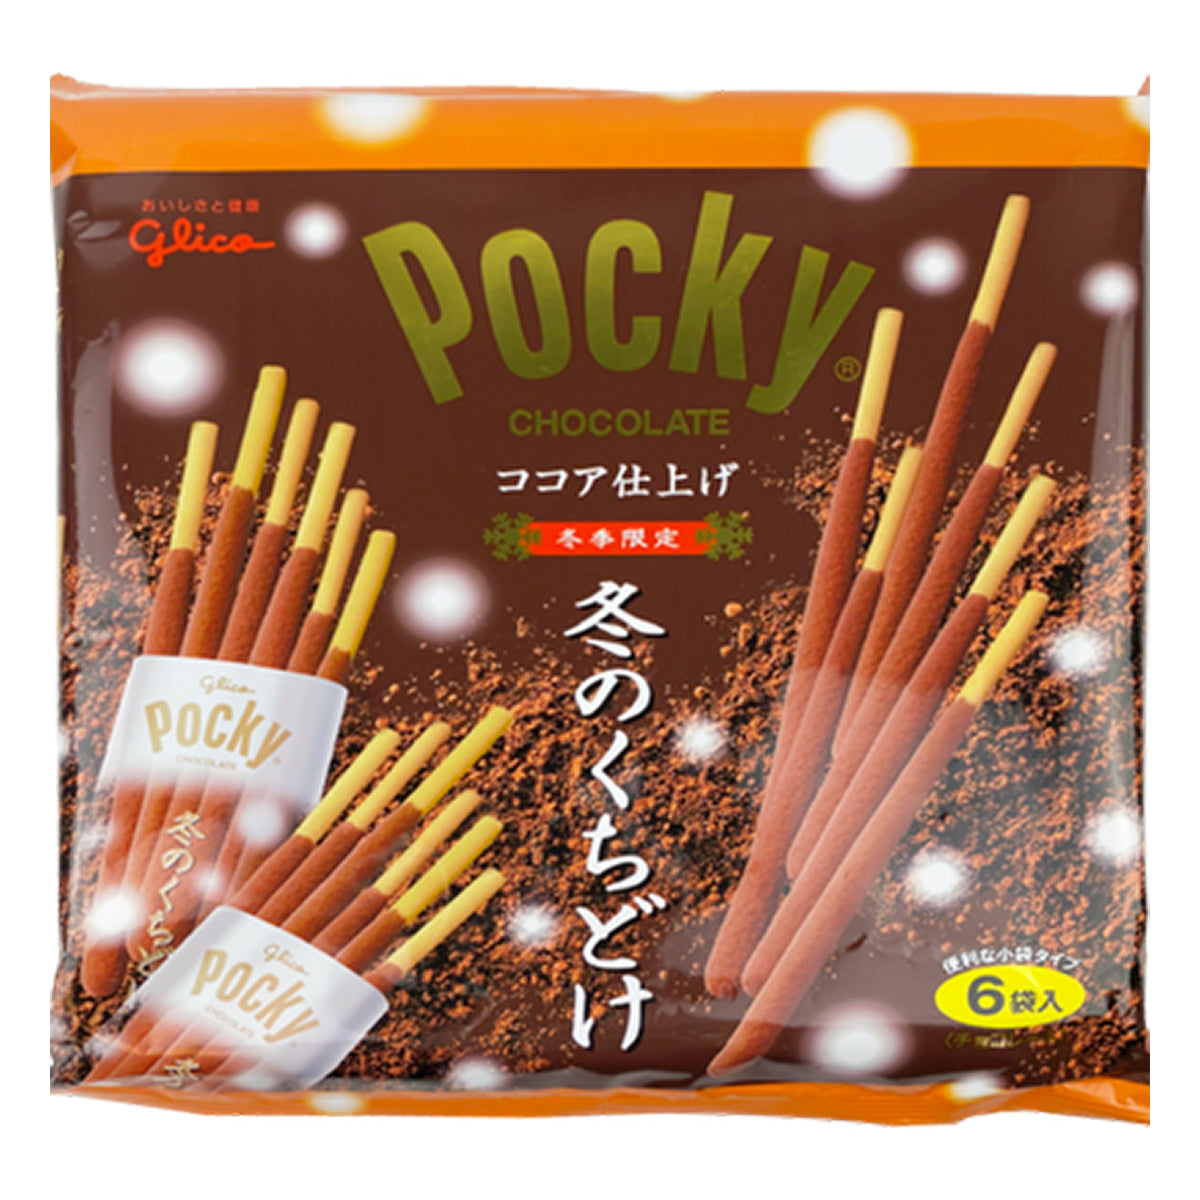 pocky rich cocoa biscuit sticks winter edition - 131g